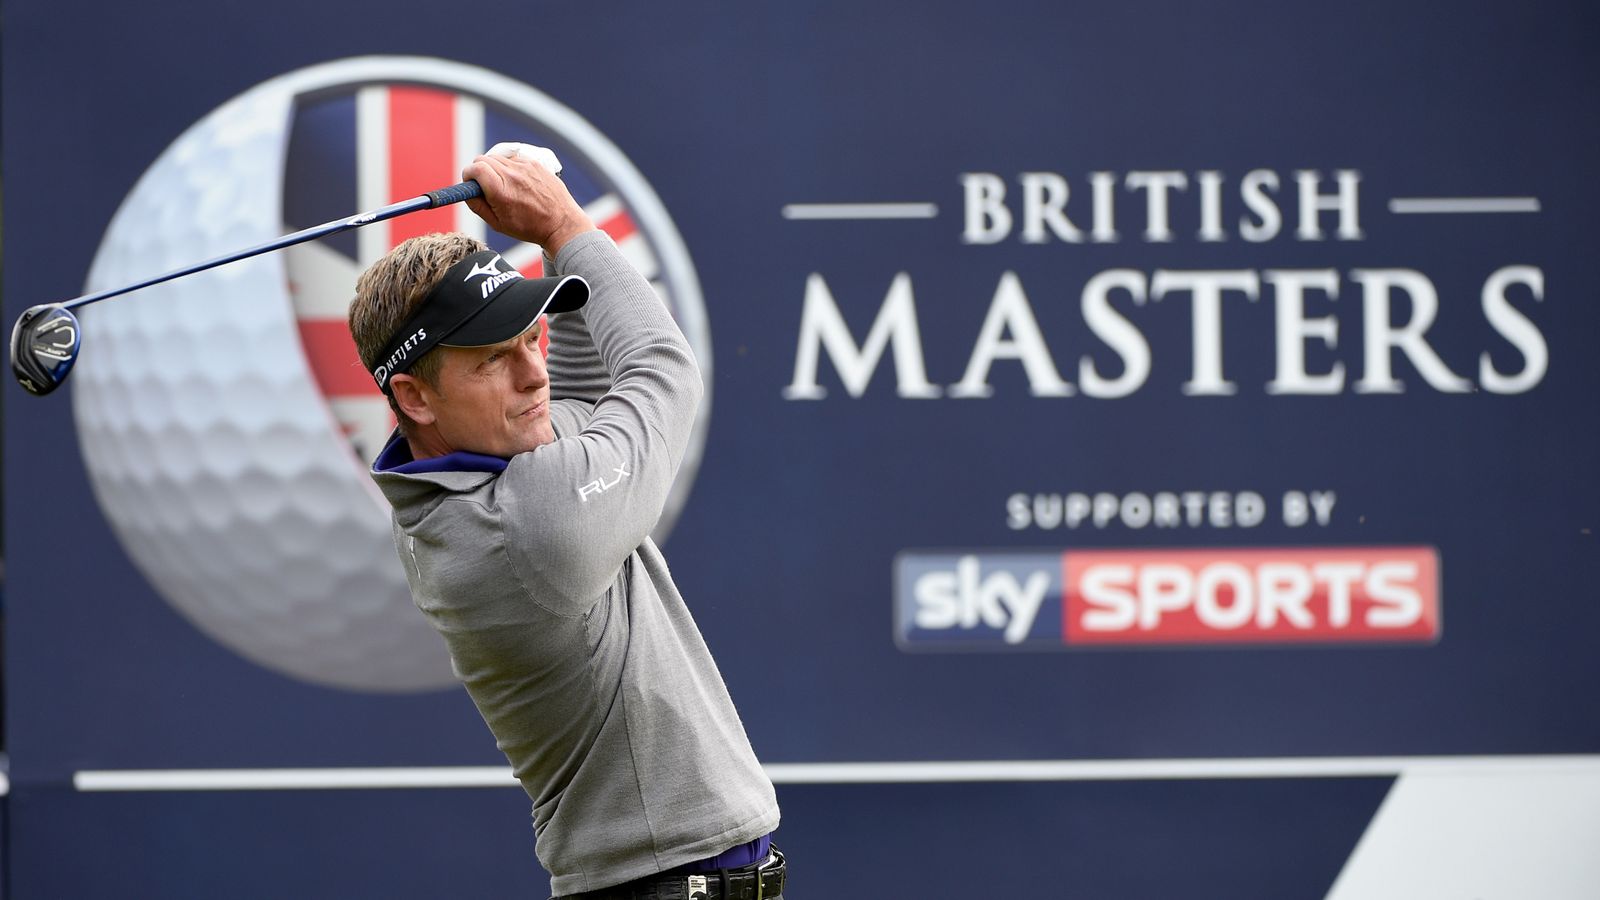 Sky Sports supporting Get Into Golf in buildup to British Masters